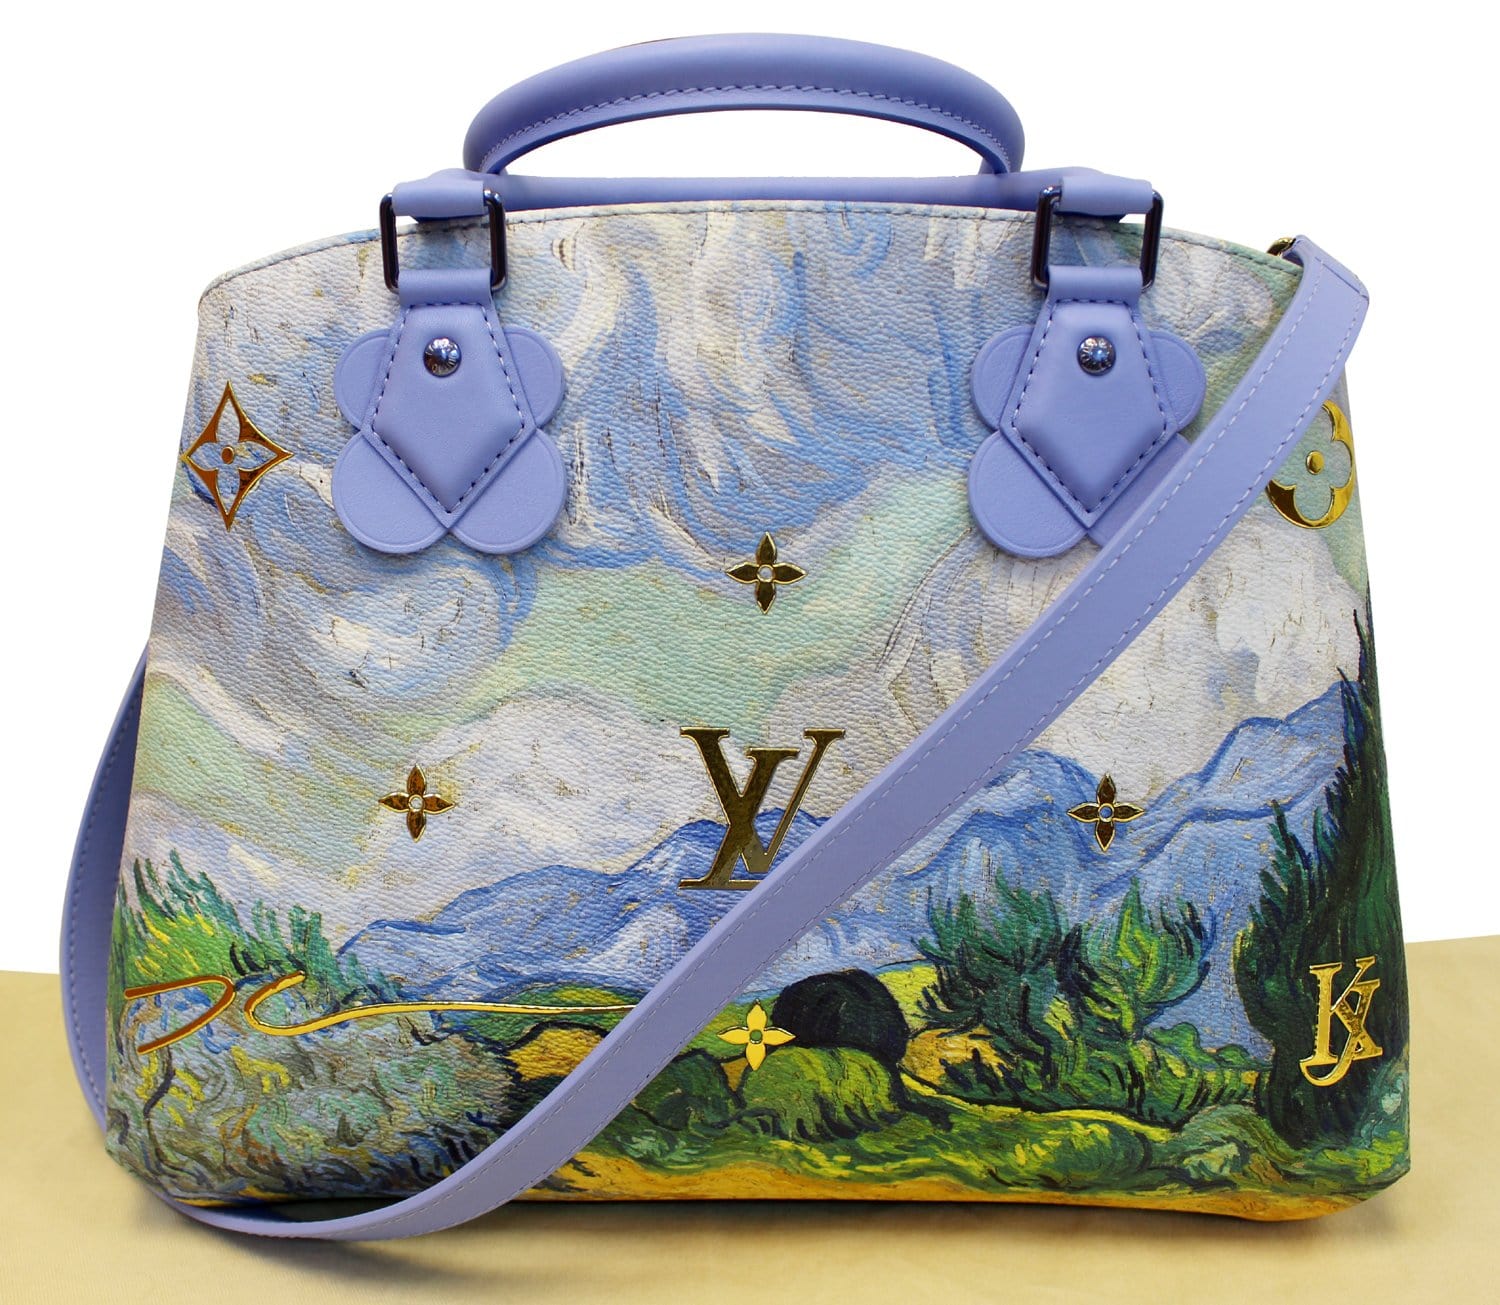 Louis Vuitton Masters Collection Van Gogh Neverfull MM Tote Bag Light